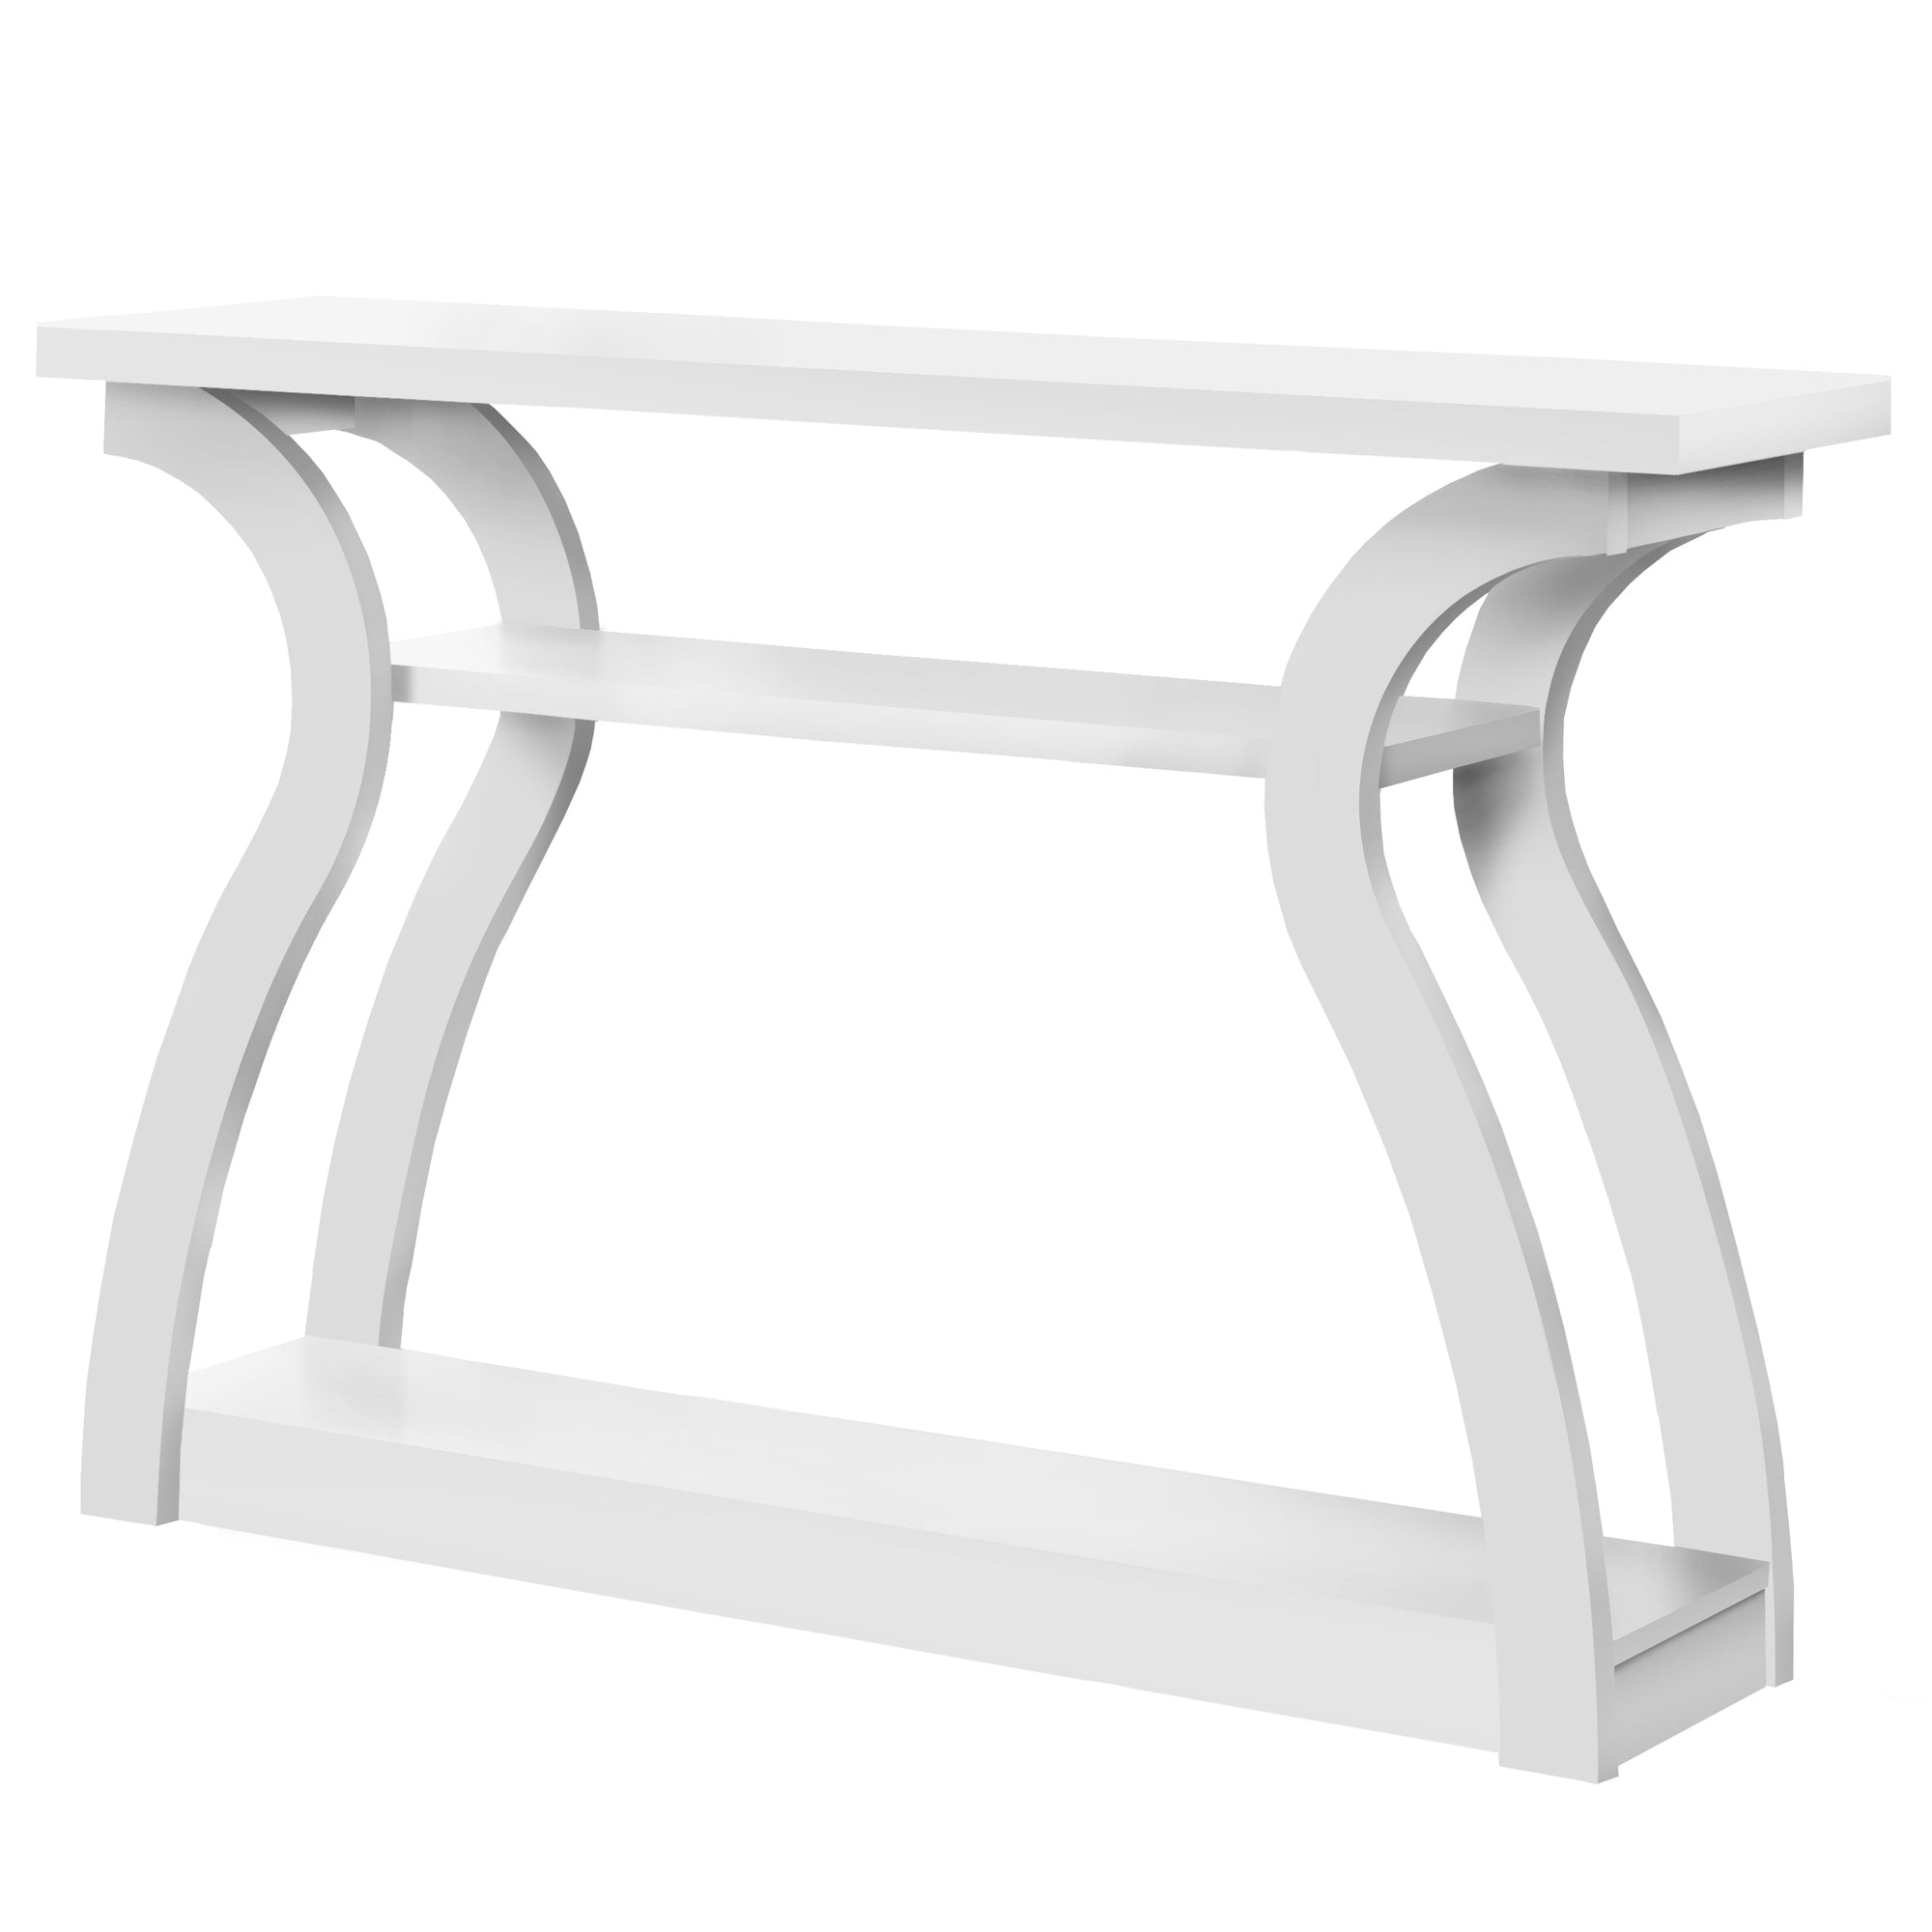 47" White Floor Shelf Console Table With Storage